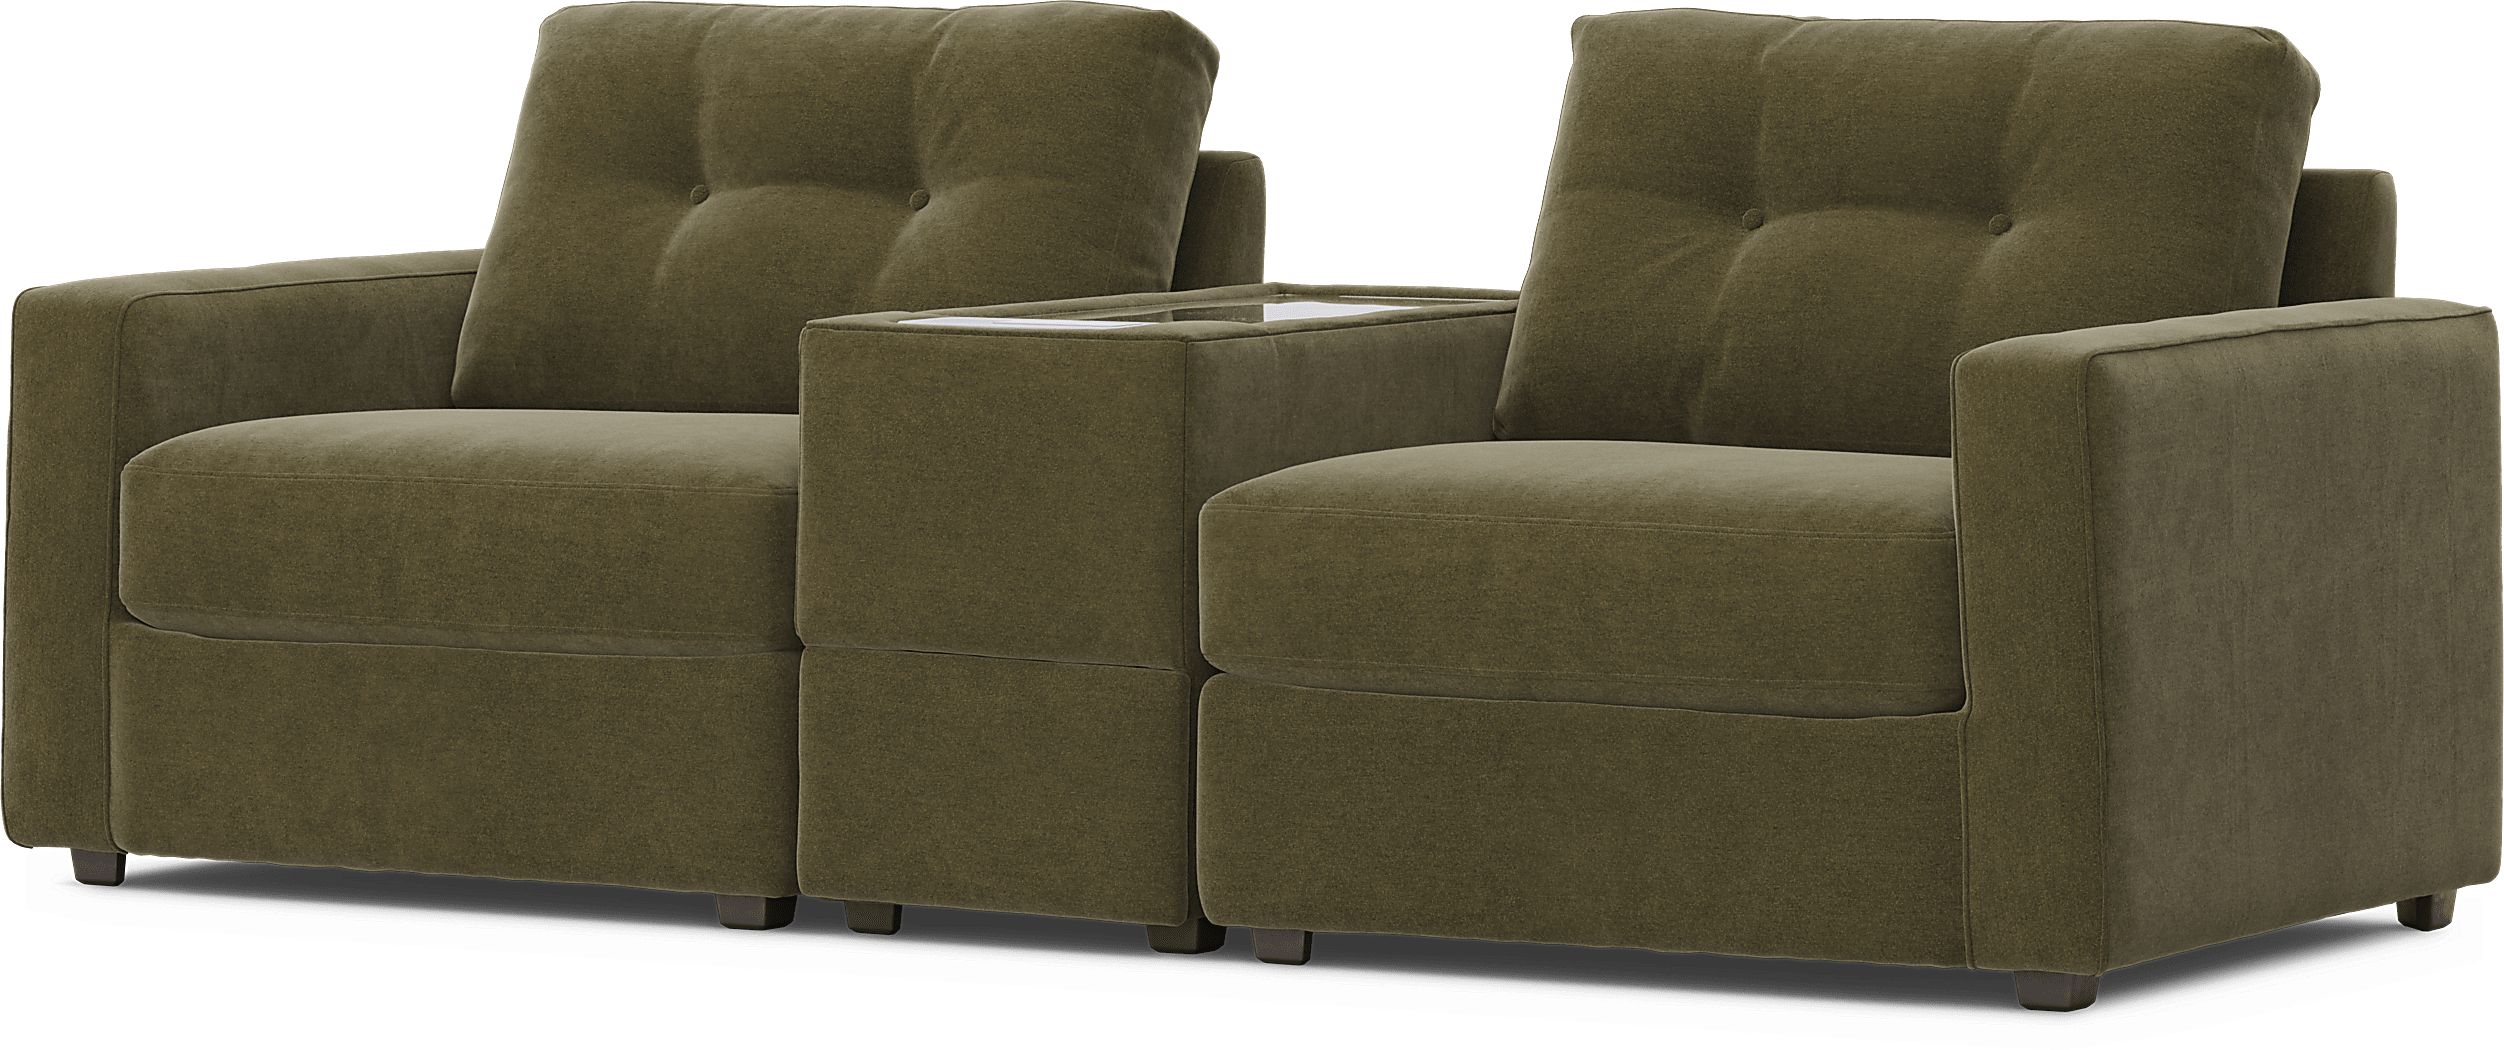 ModularOne Moss 3 Pc Sectional with Media Console